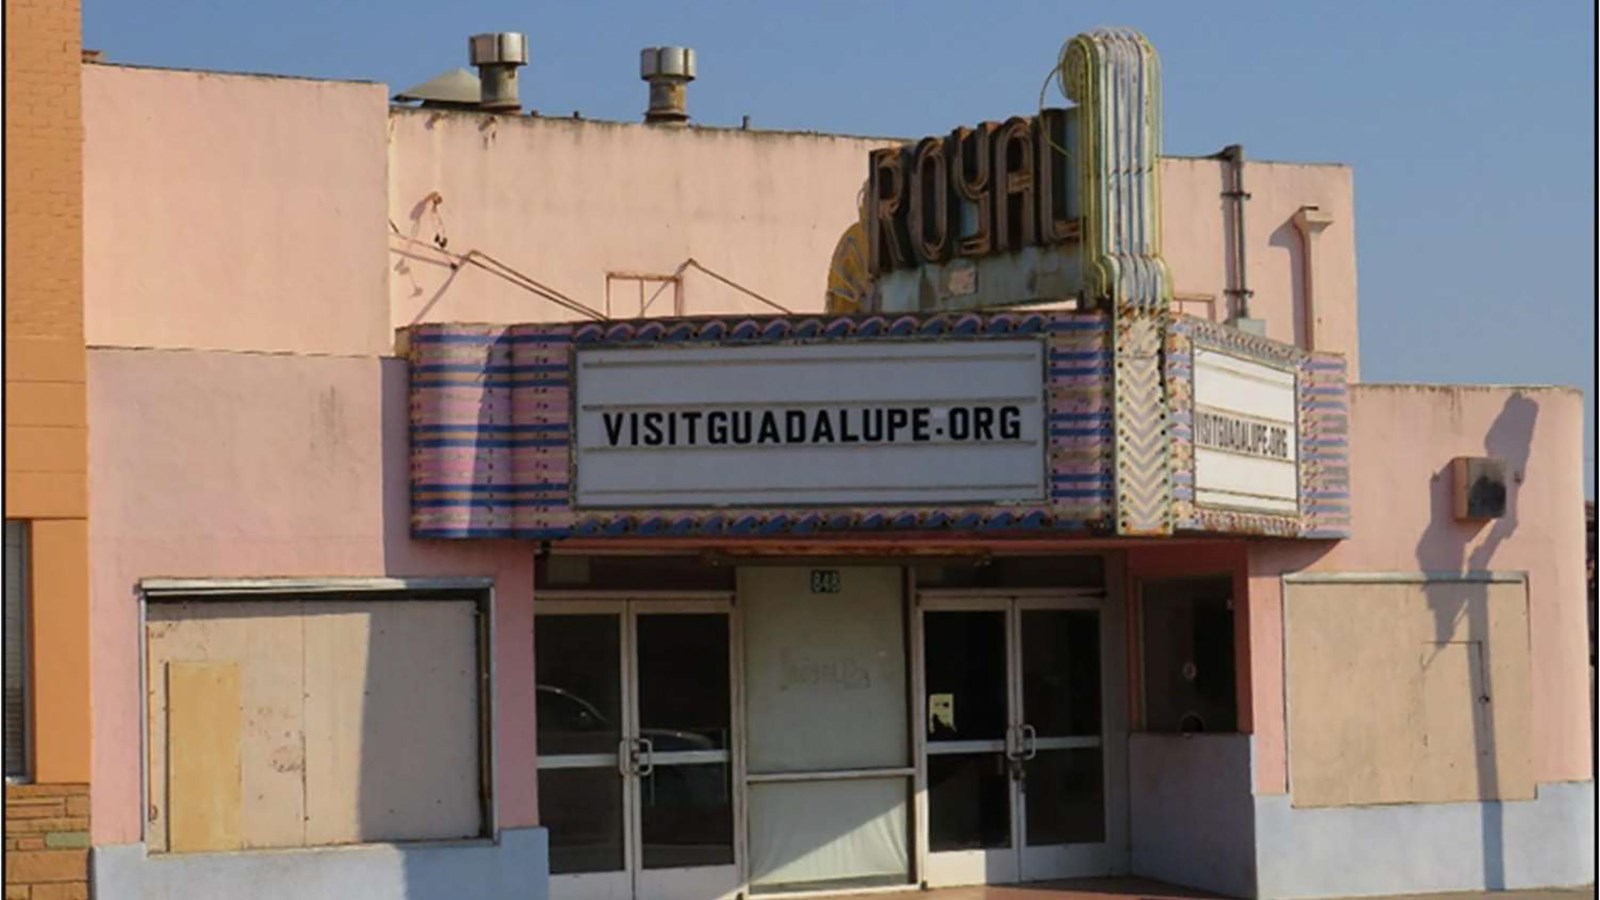 Theater entrance with Art Deco Sign reading Royal, and marquee reading visitguadalupe.org